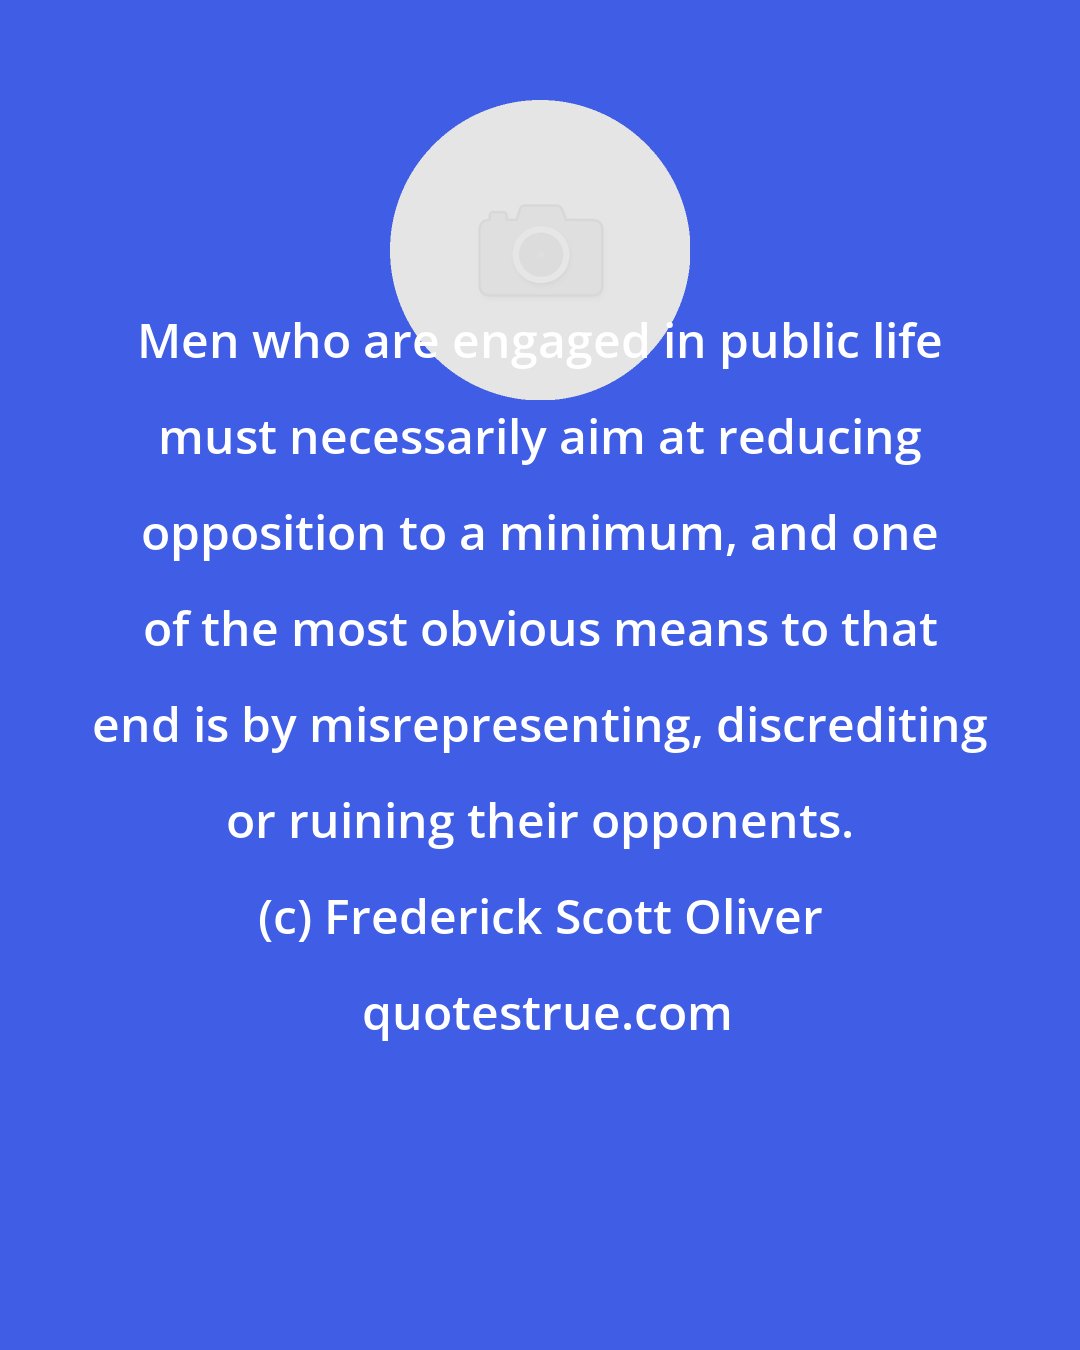 Frederick Scott Oliver: Men who are engaged in public life must necessarily aim at reducing opposition to a minimum, and one of the most obvious means to that end is by misrepresenting, discrediting or ruining their opponents.